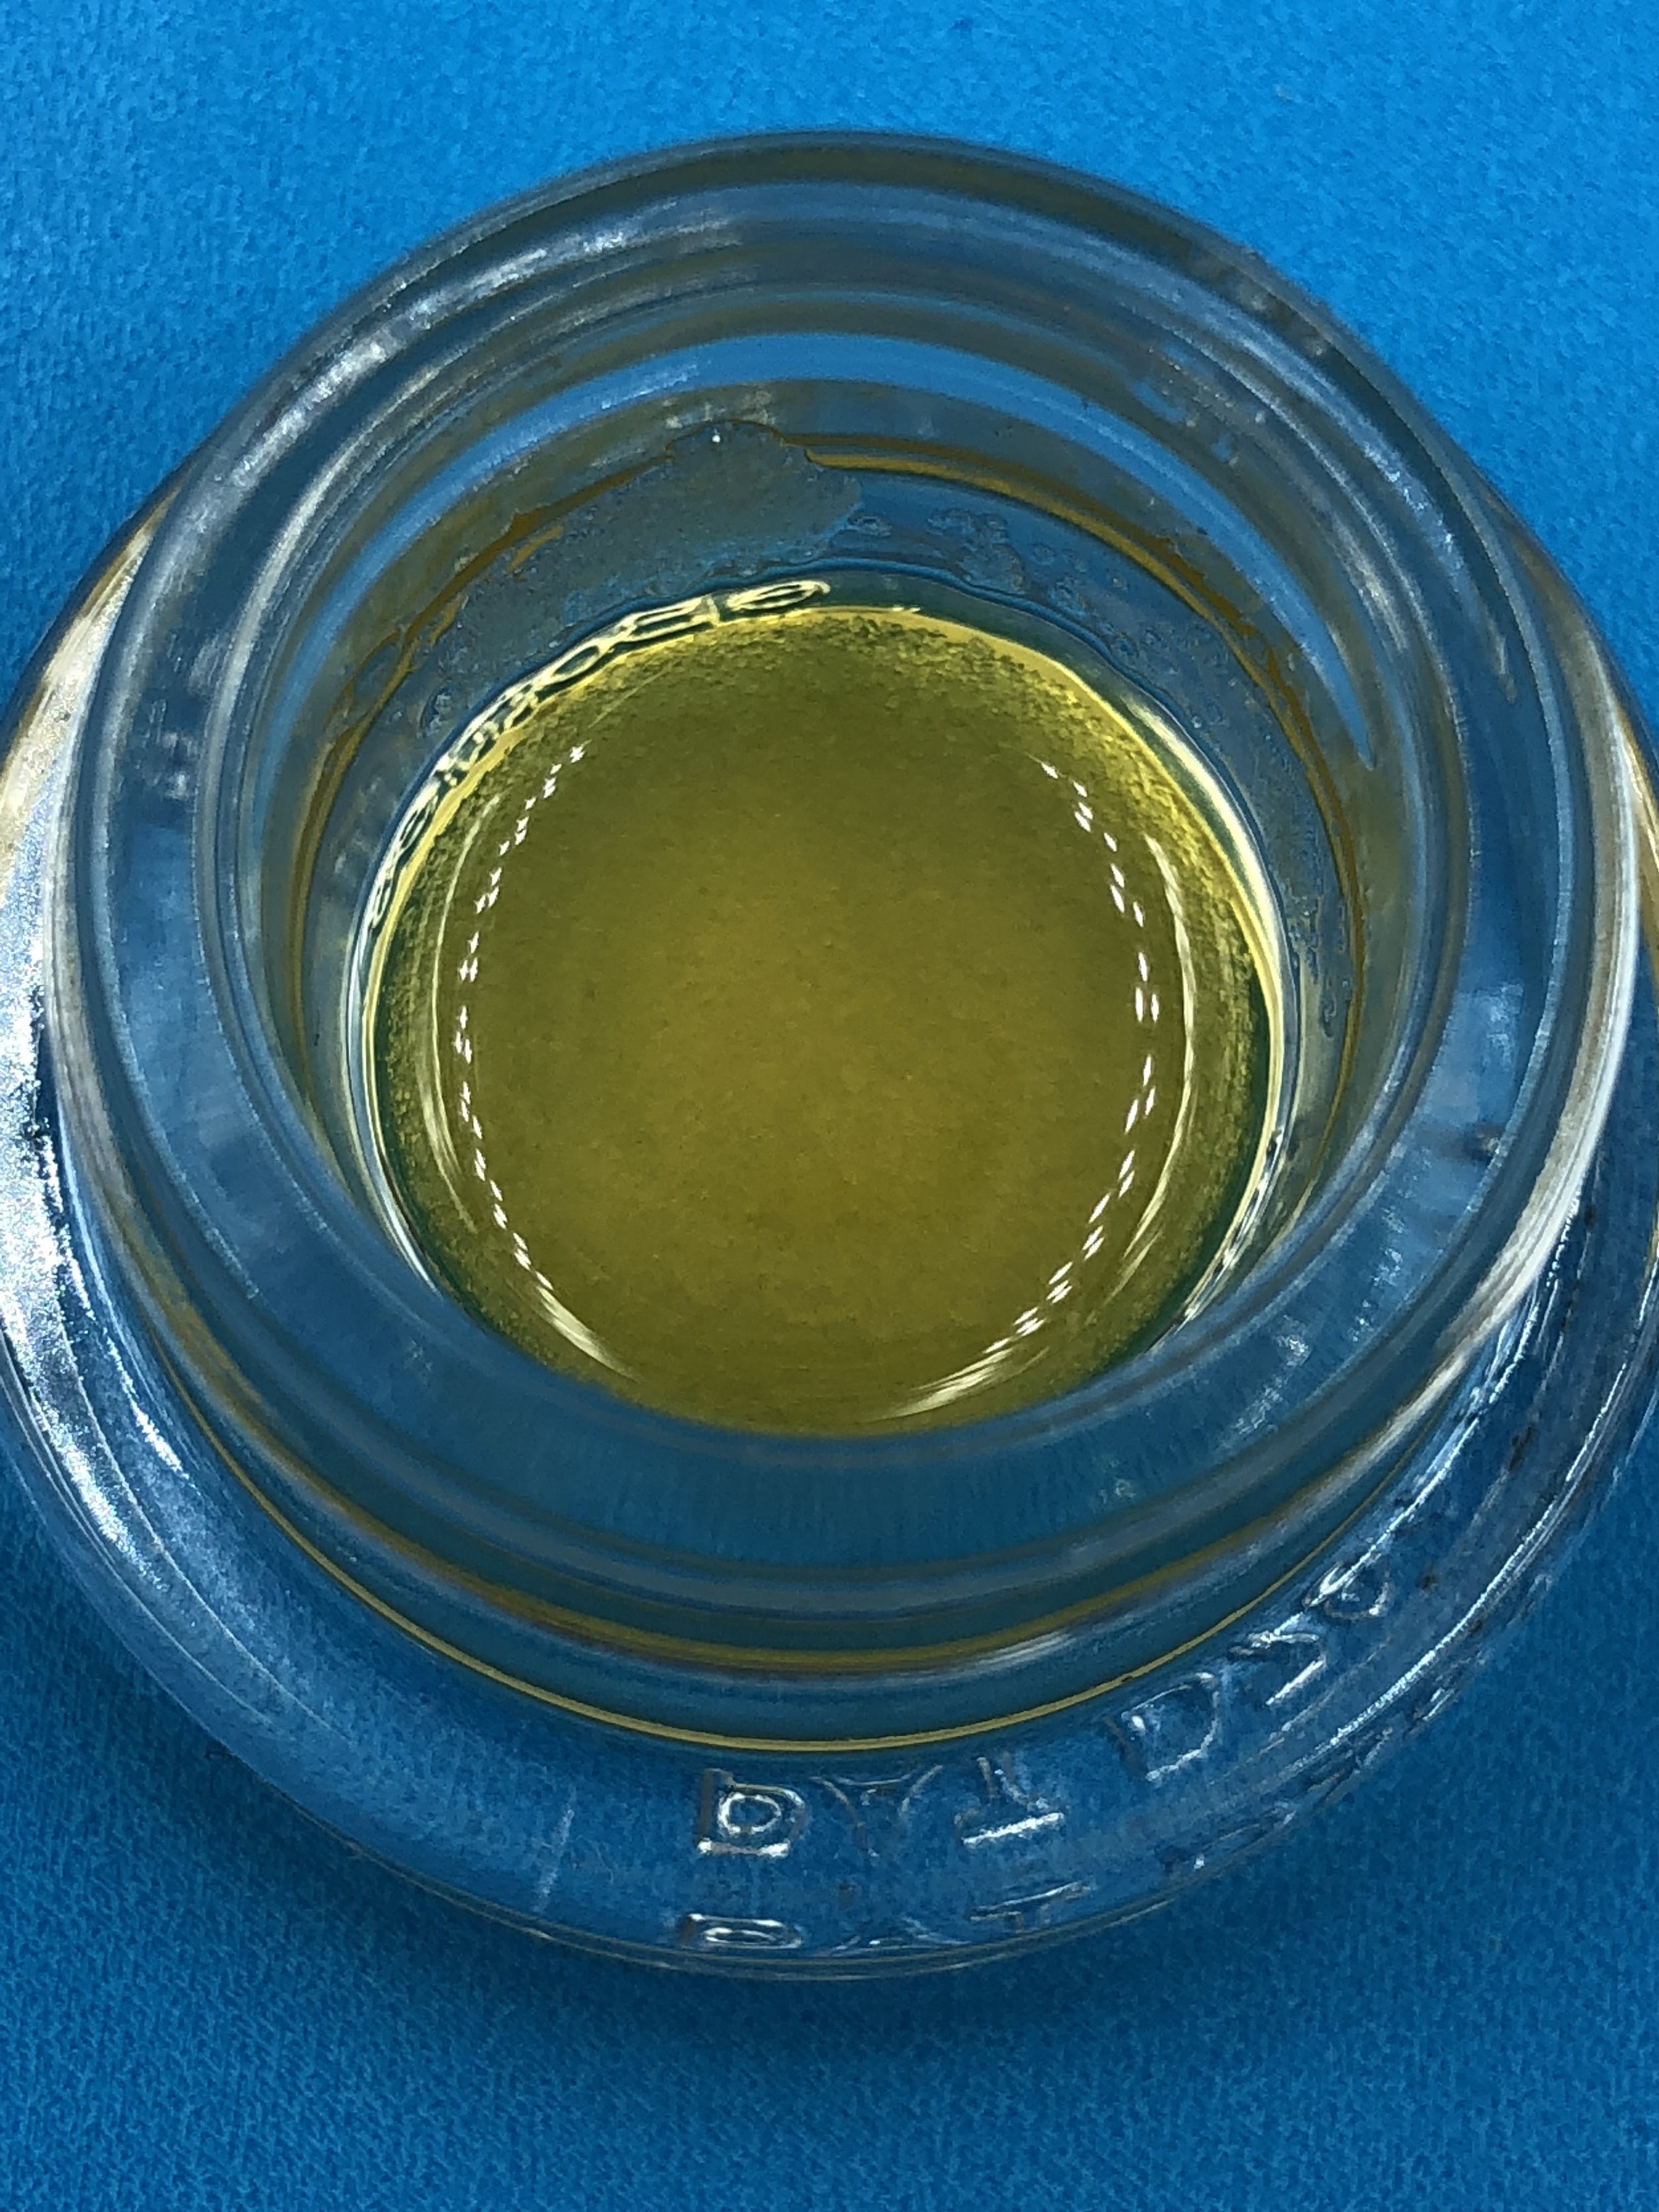 concentrate-arcturus-sour-berry-live-resin-sauce